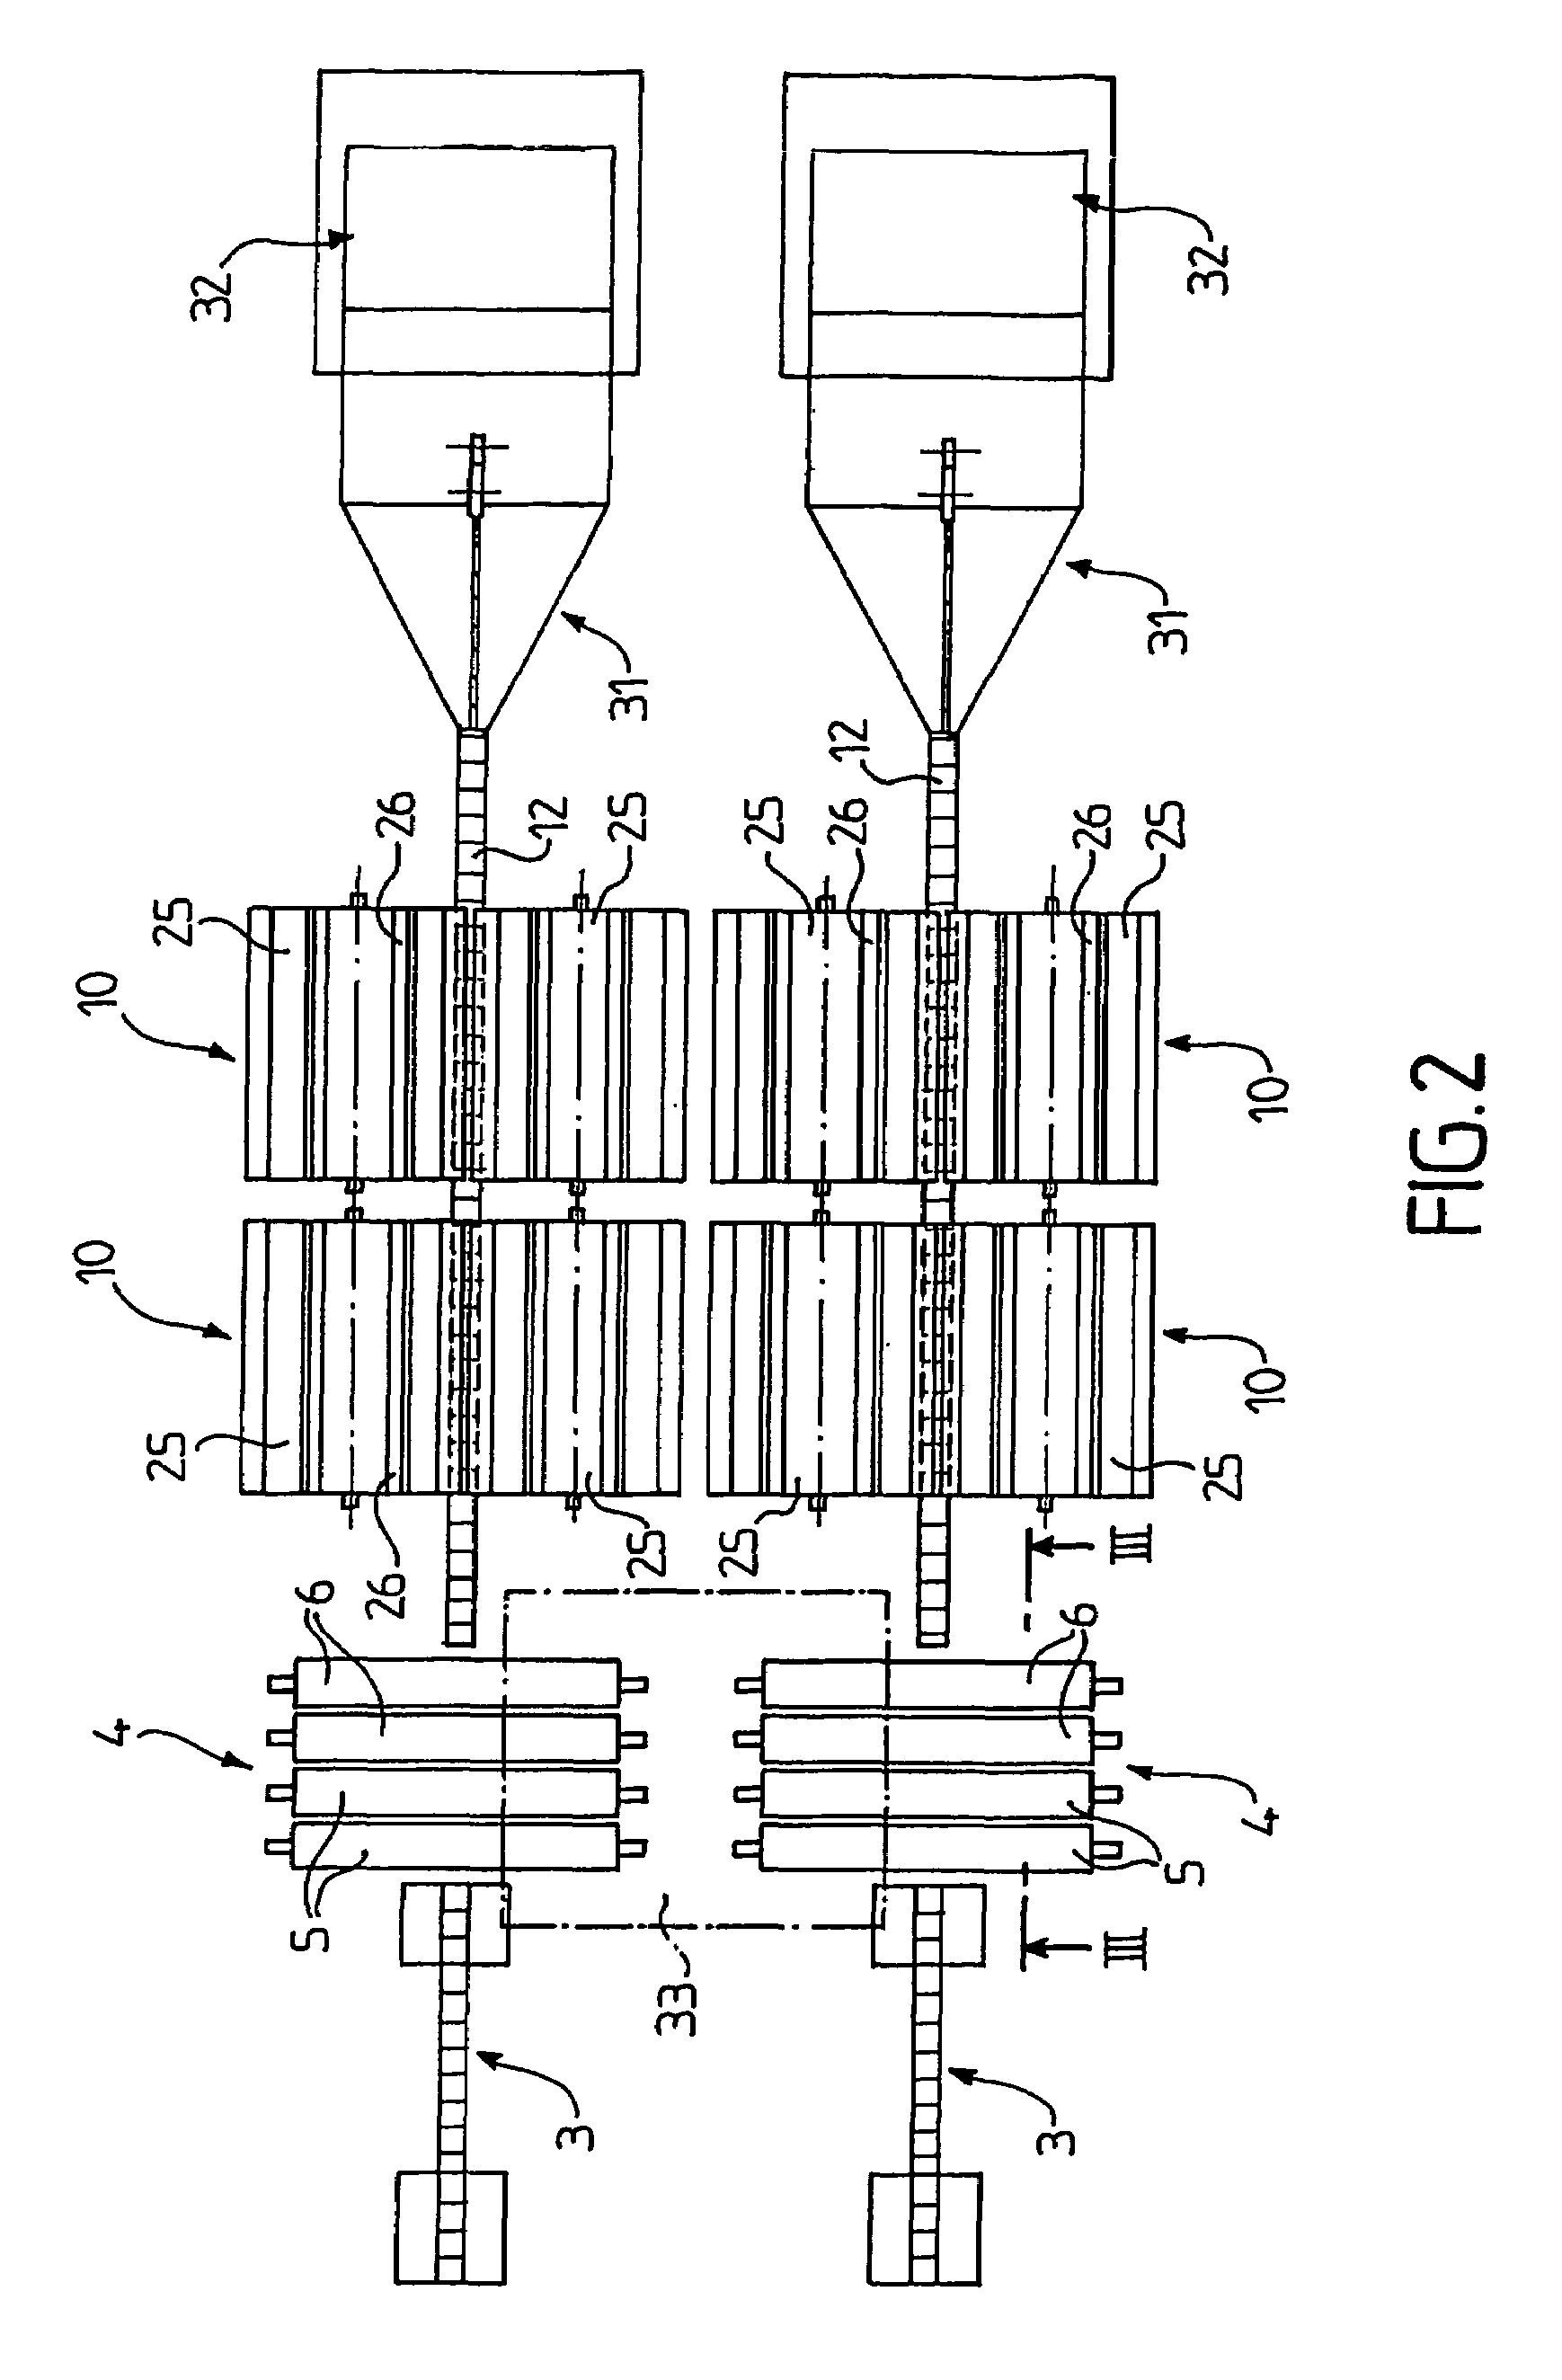 Method and machine for packing fibrous plants into balls especially common flax, hemp plant and sisal